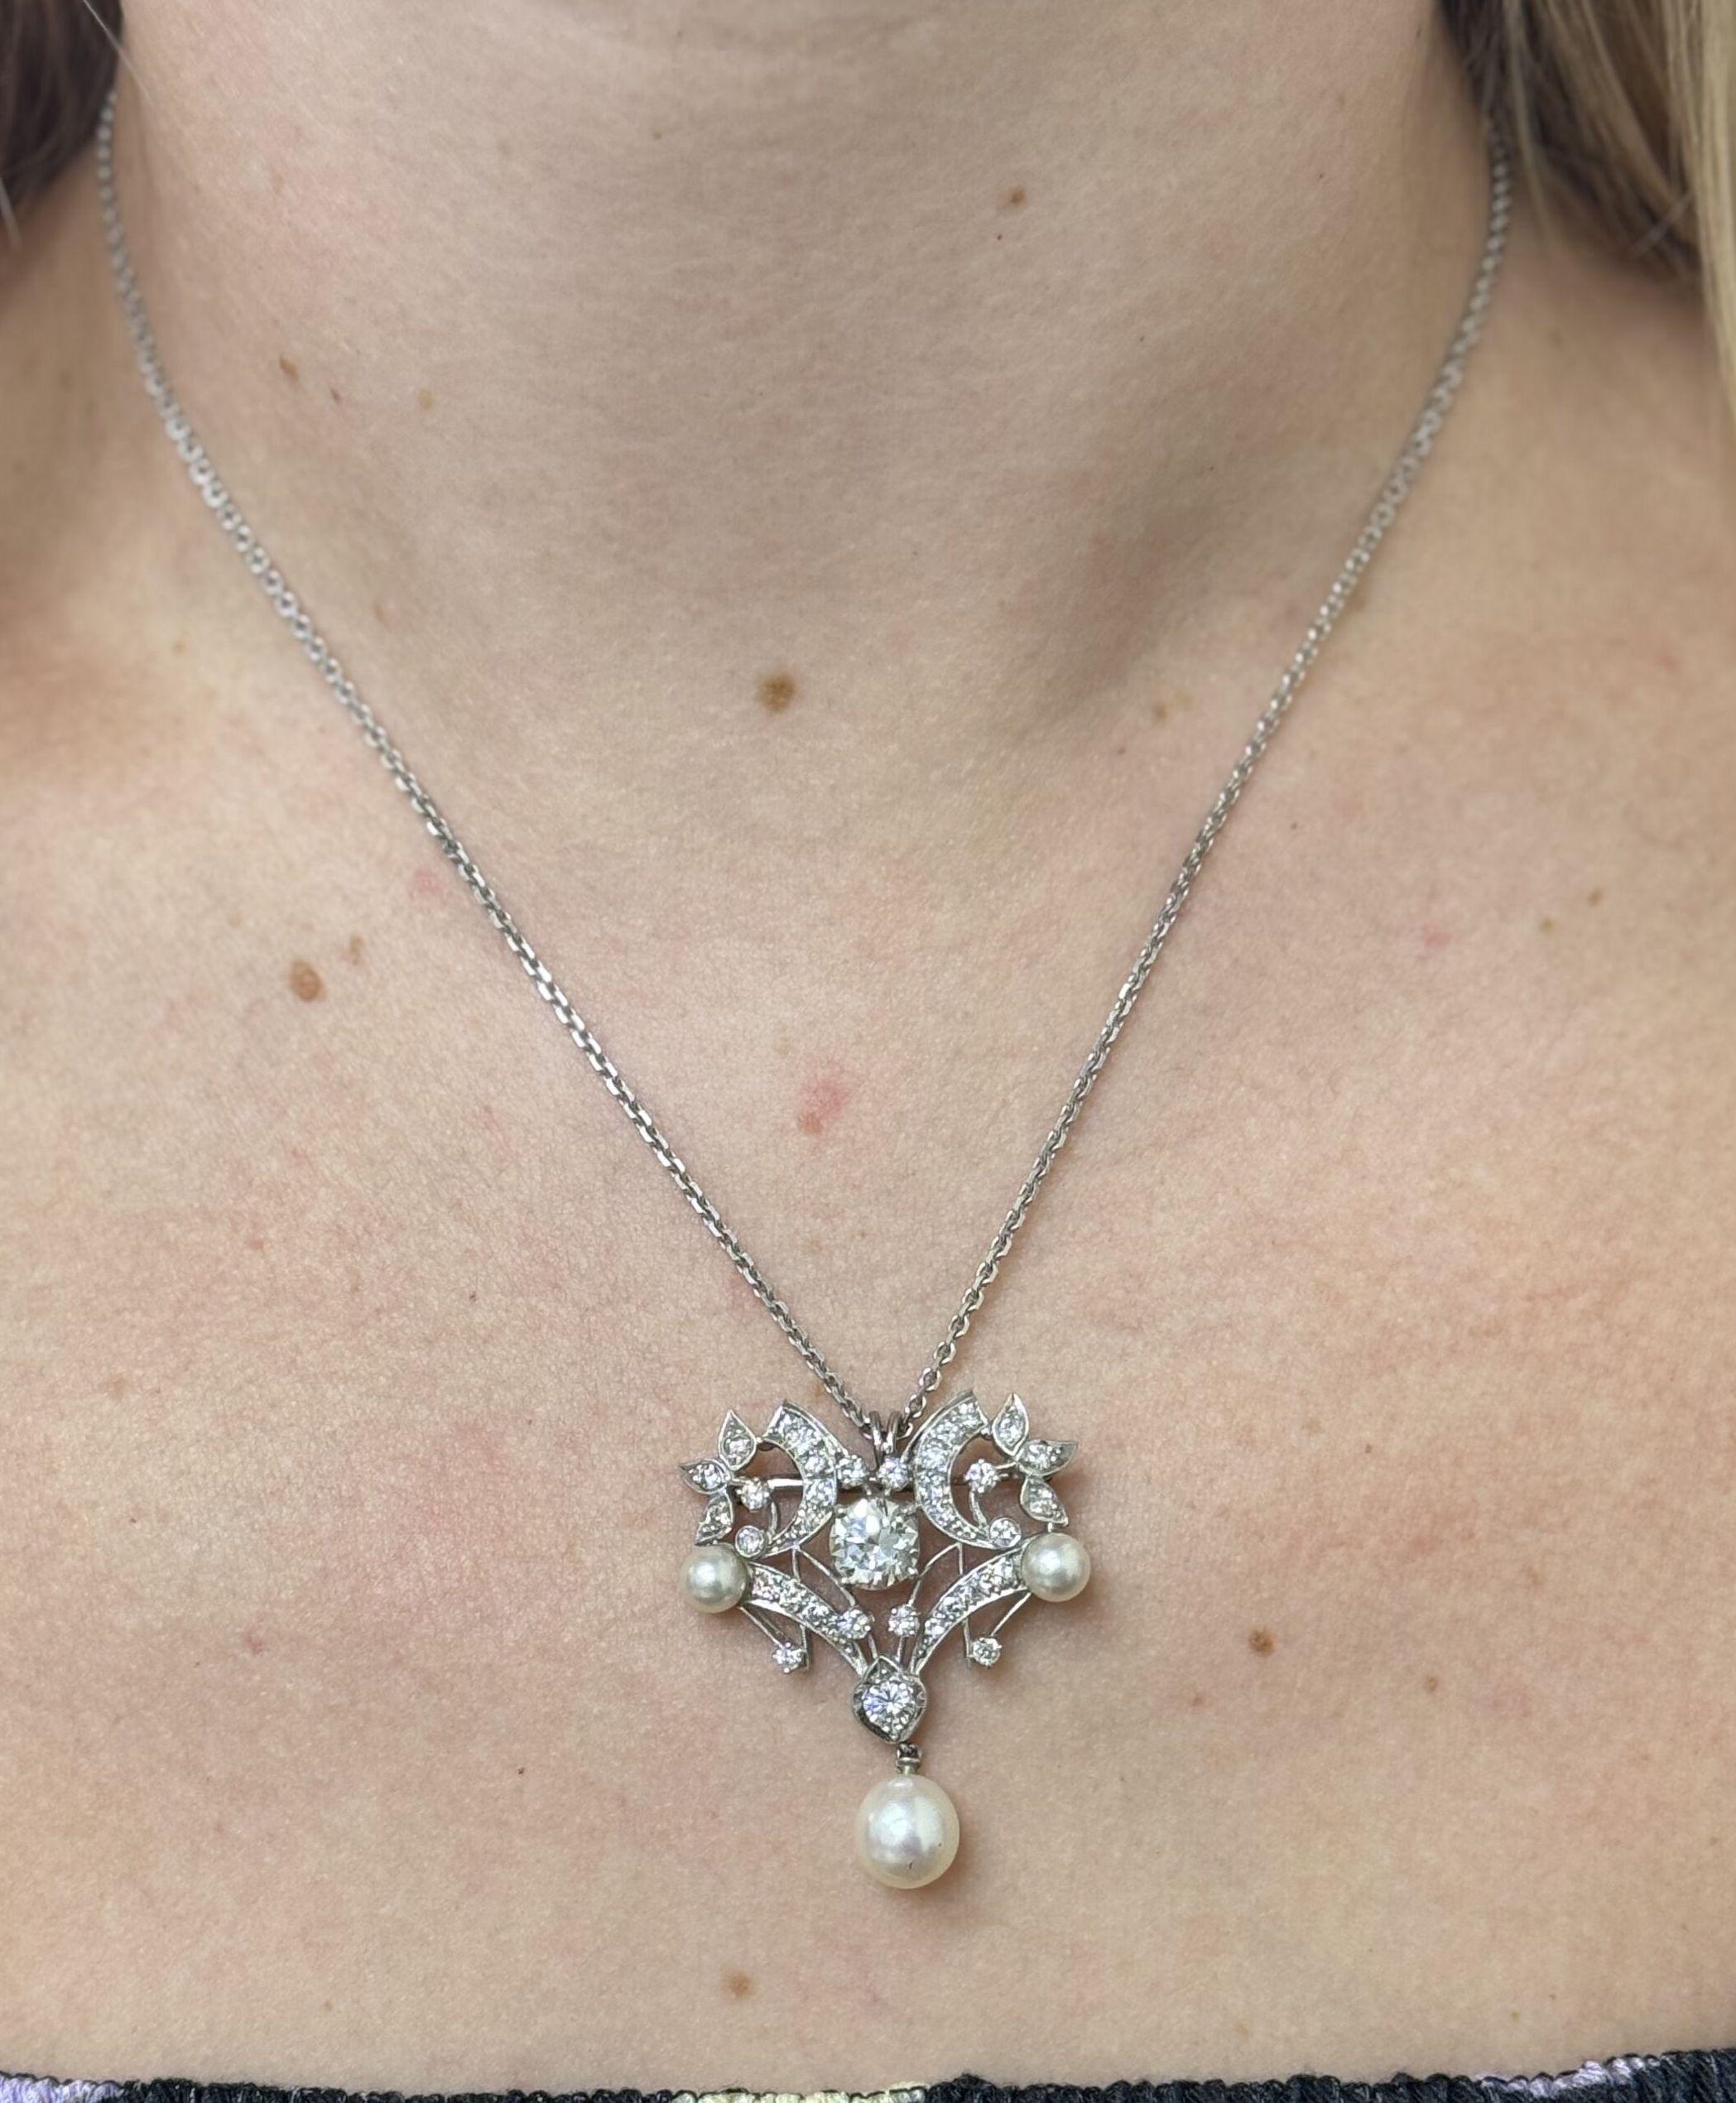 1950s Midcentury 14k gold chain with a brooch/pendant suspended. Set with Old European cut diamond in the center approx. 1.26ct J/VS. Surrounding stones are approx. 0.55ctw, and pearls. Necklace is 18